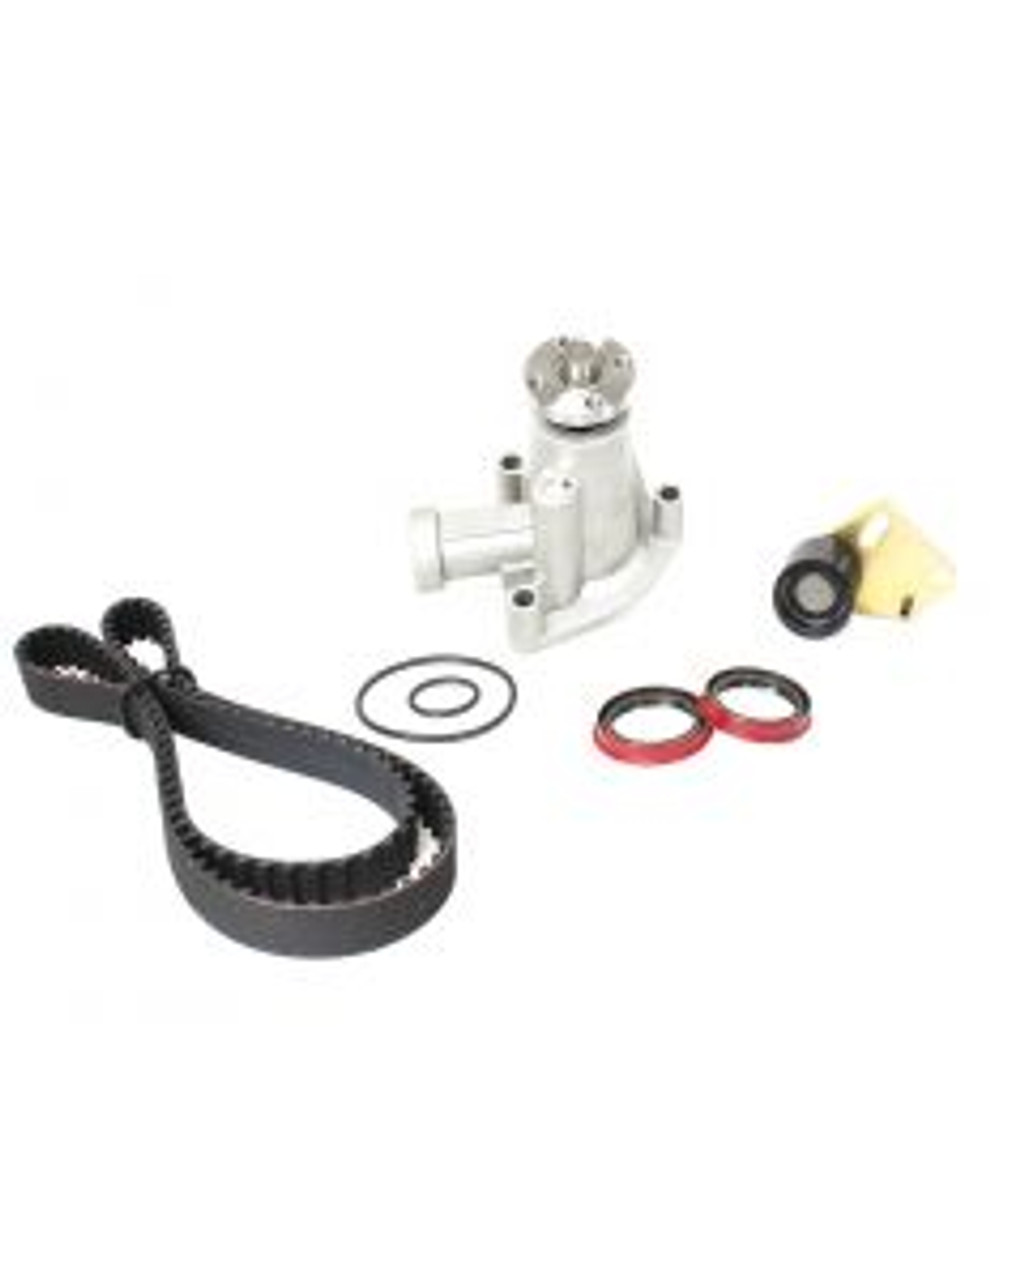 2001 Mazda B2500 2.5L Timing Belt Kit with Water Pump TBK448WP.E14